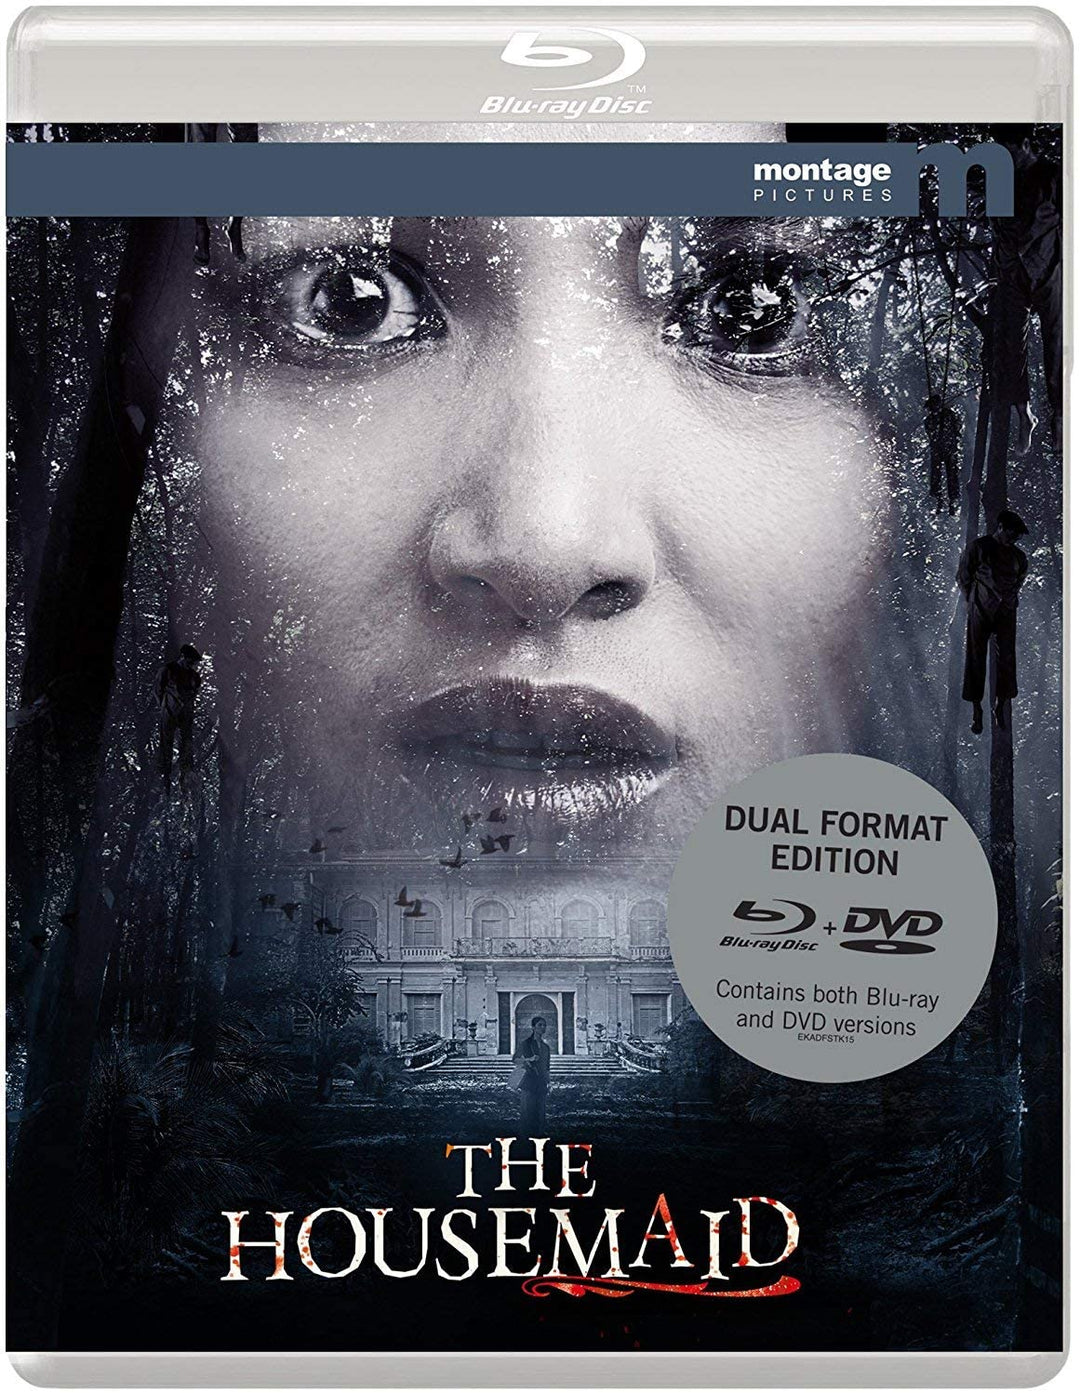 THE HOUSEMAID [Montage Pictures] Dual Format Edition – Thriller/Erotik-Thriller [Blu-ray]